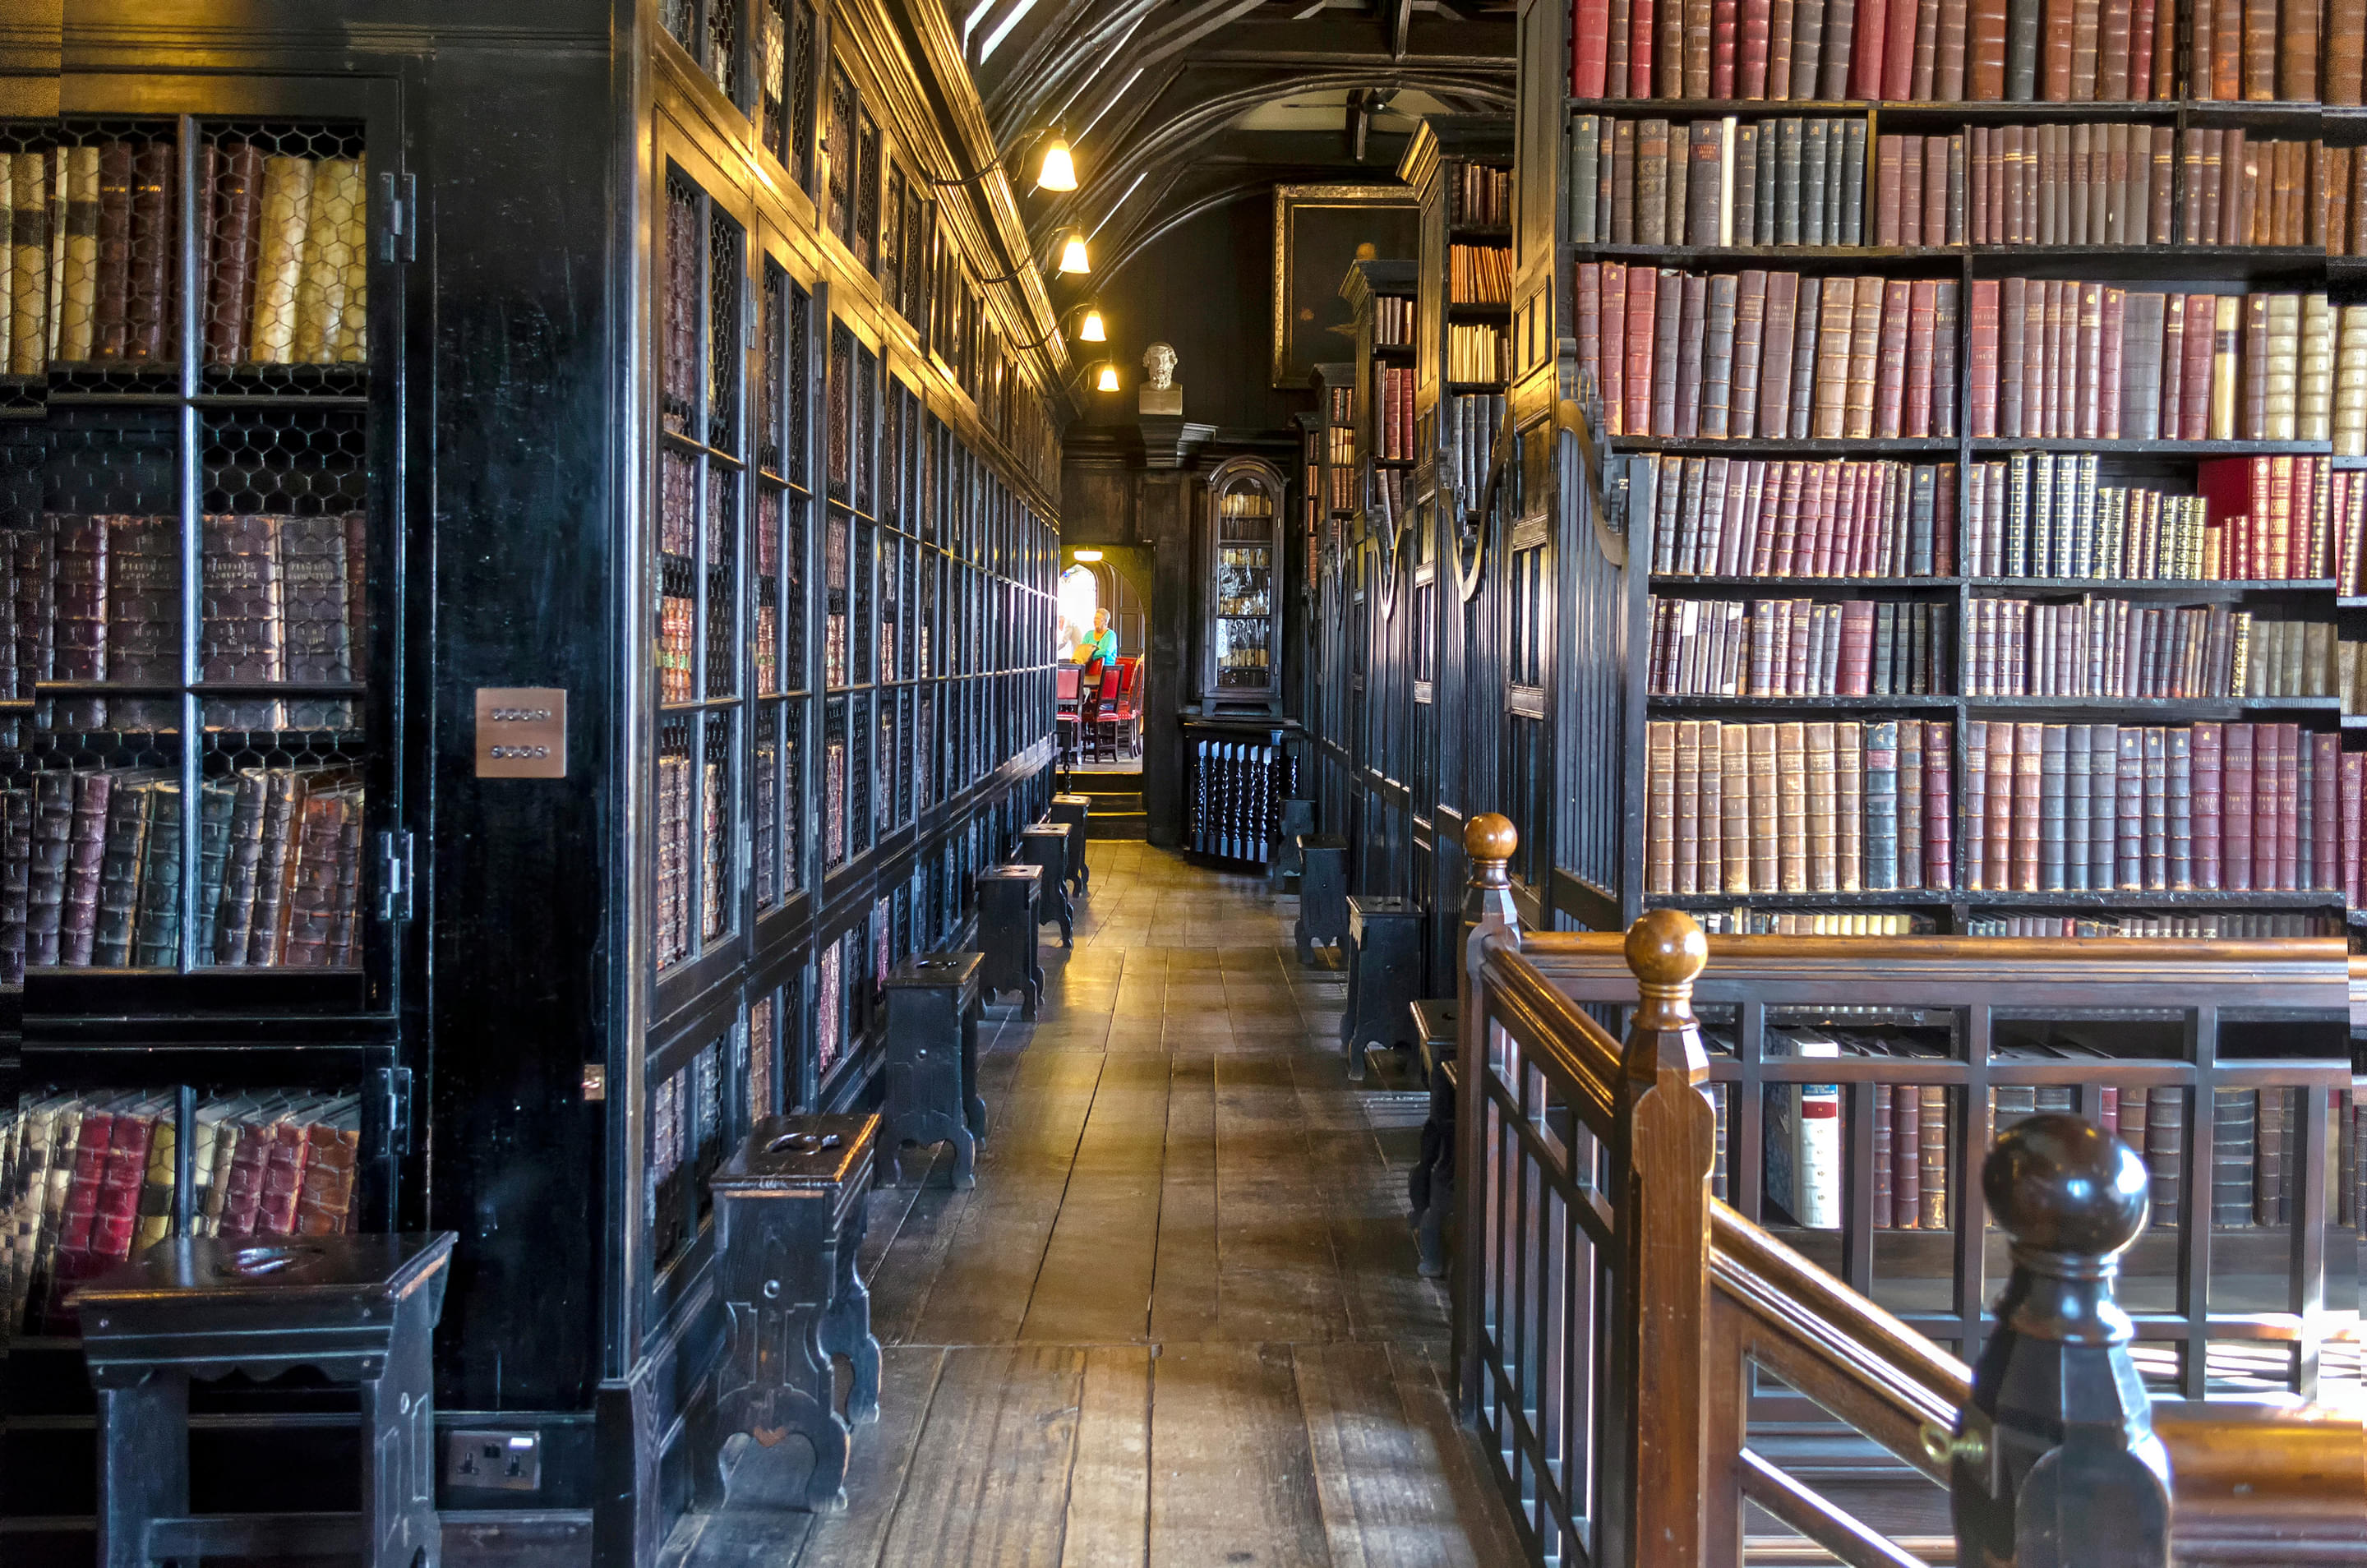 Chetham's Library Overview